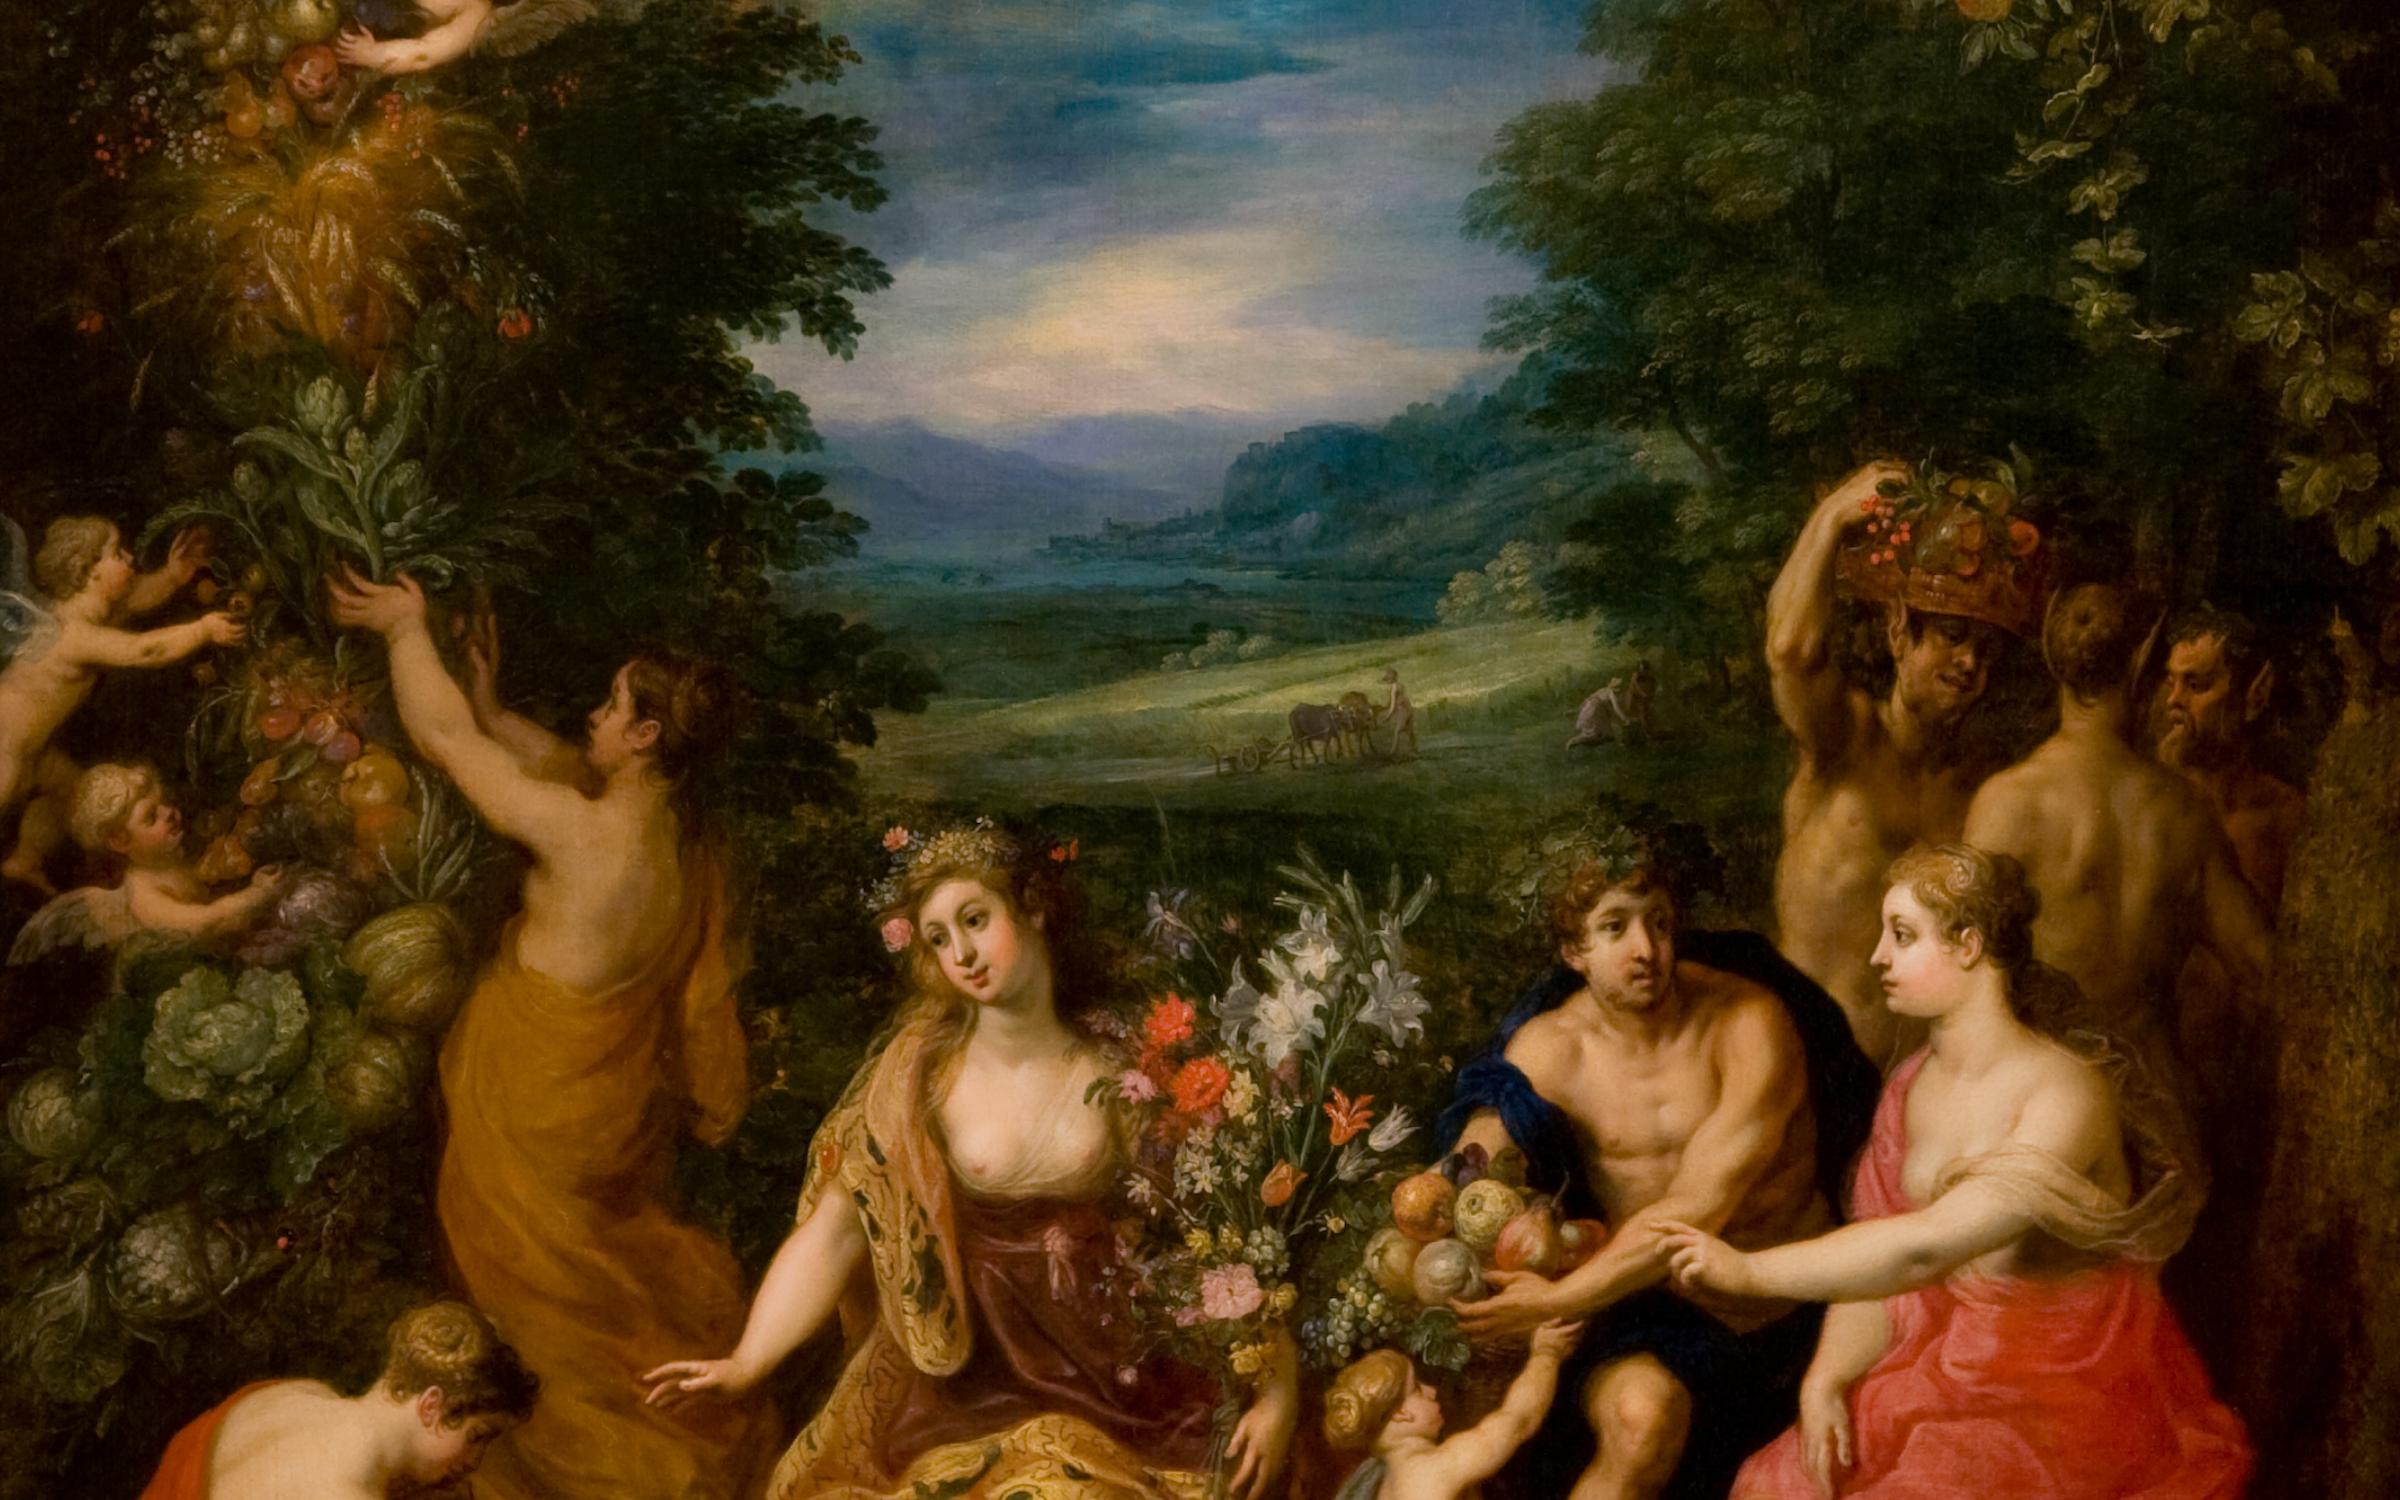 A European painting with men and women in loose robes with fruit and flowers.